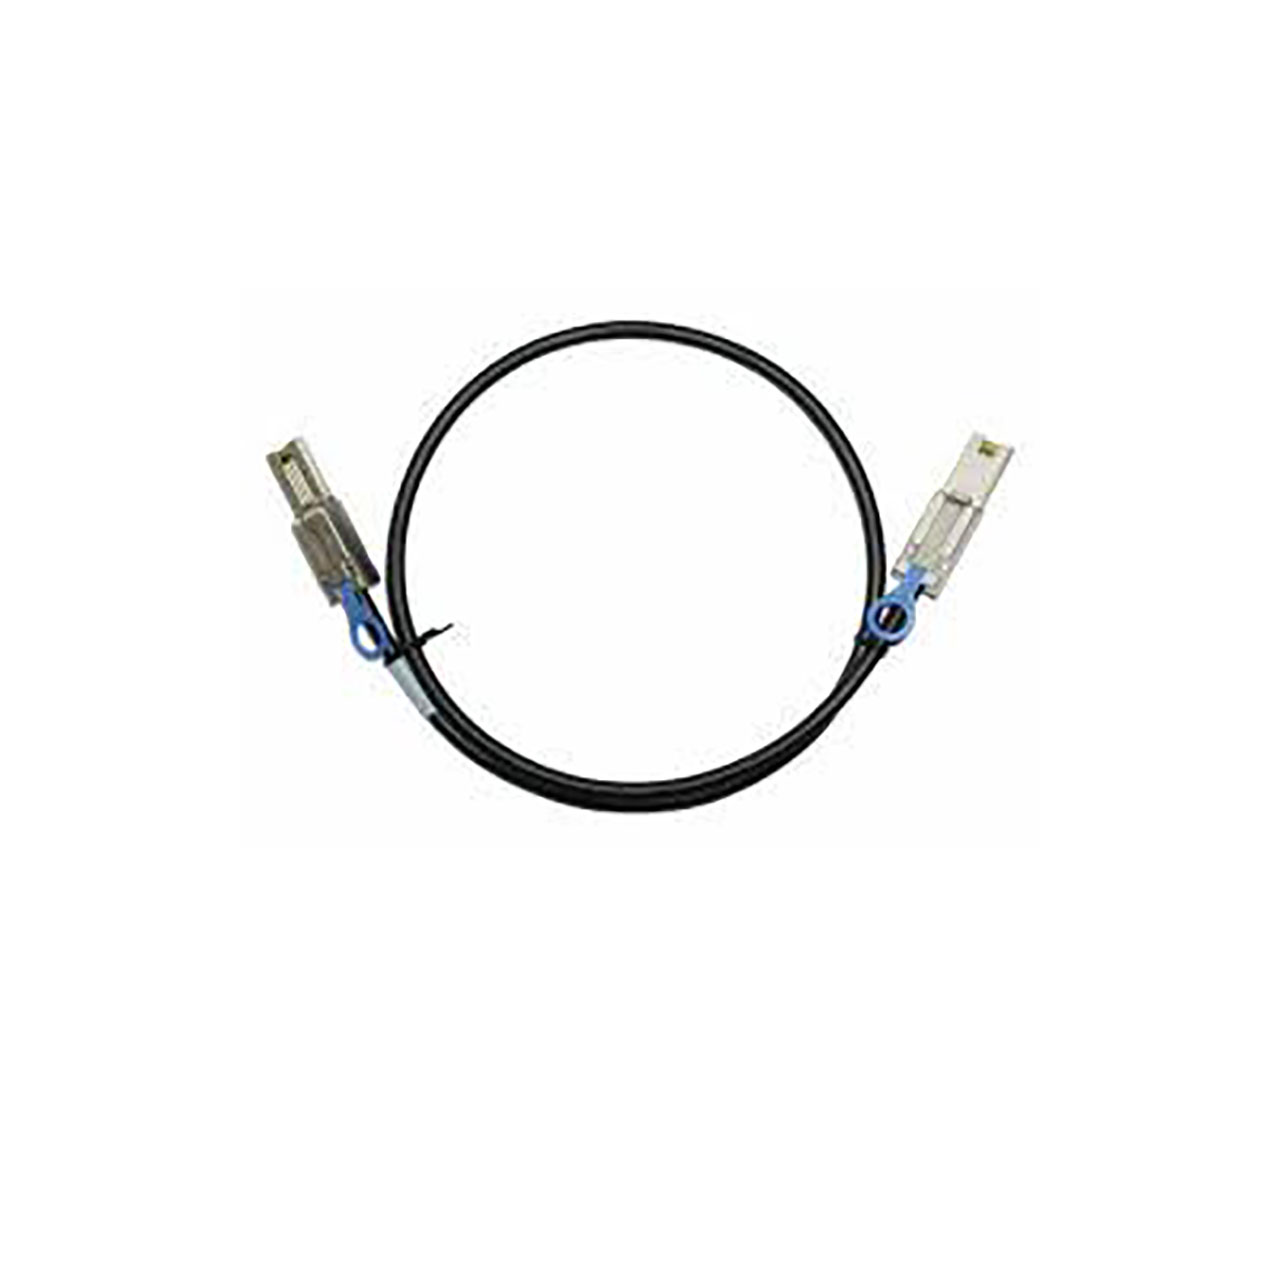 quantum-sas-2-0-interface-cable-sff-8088-to-sff-8088-16-4-ft-5-m